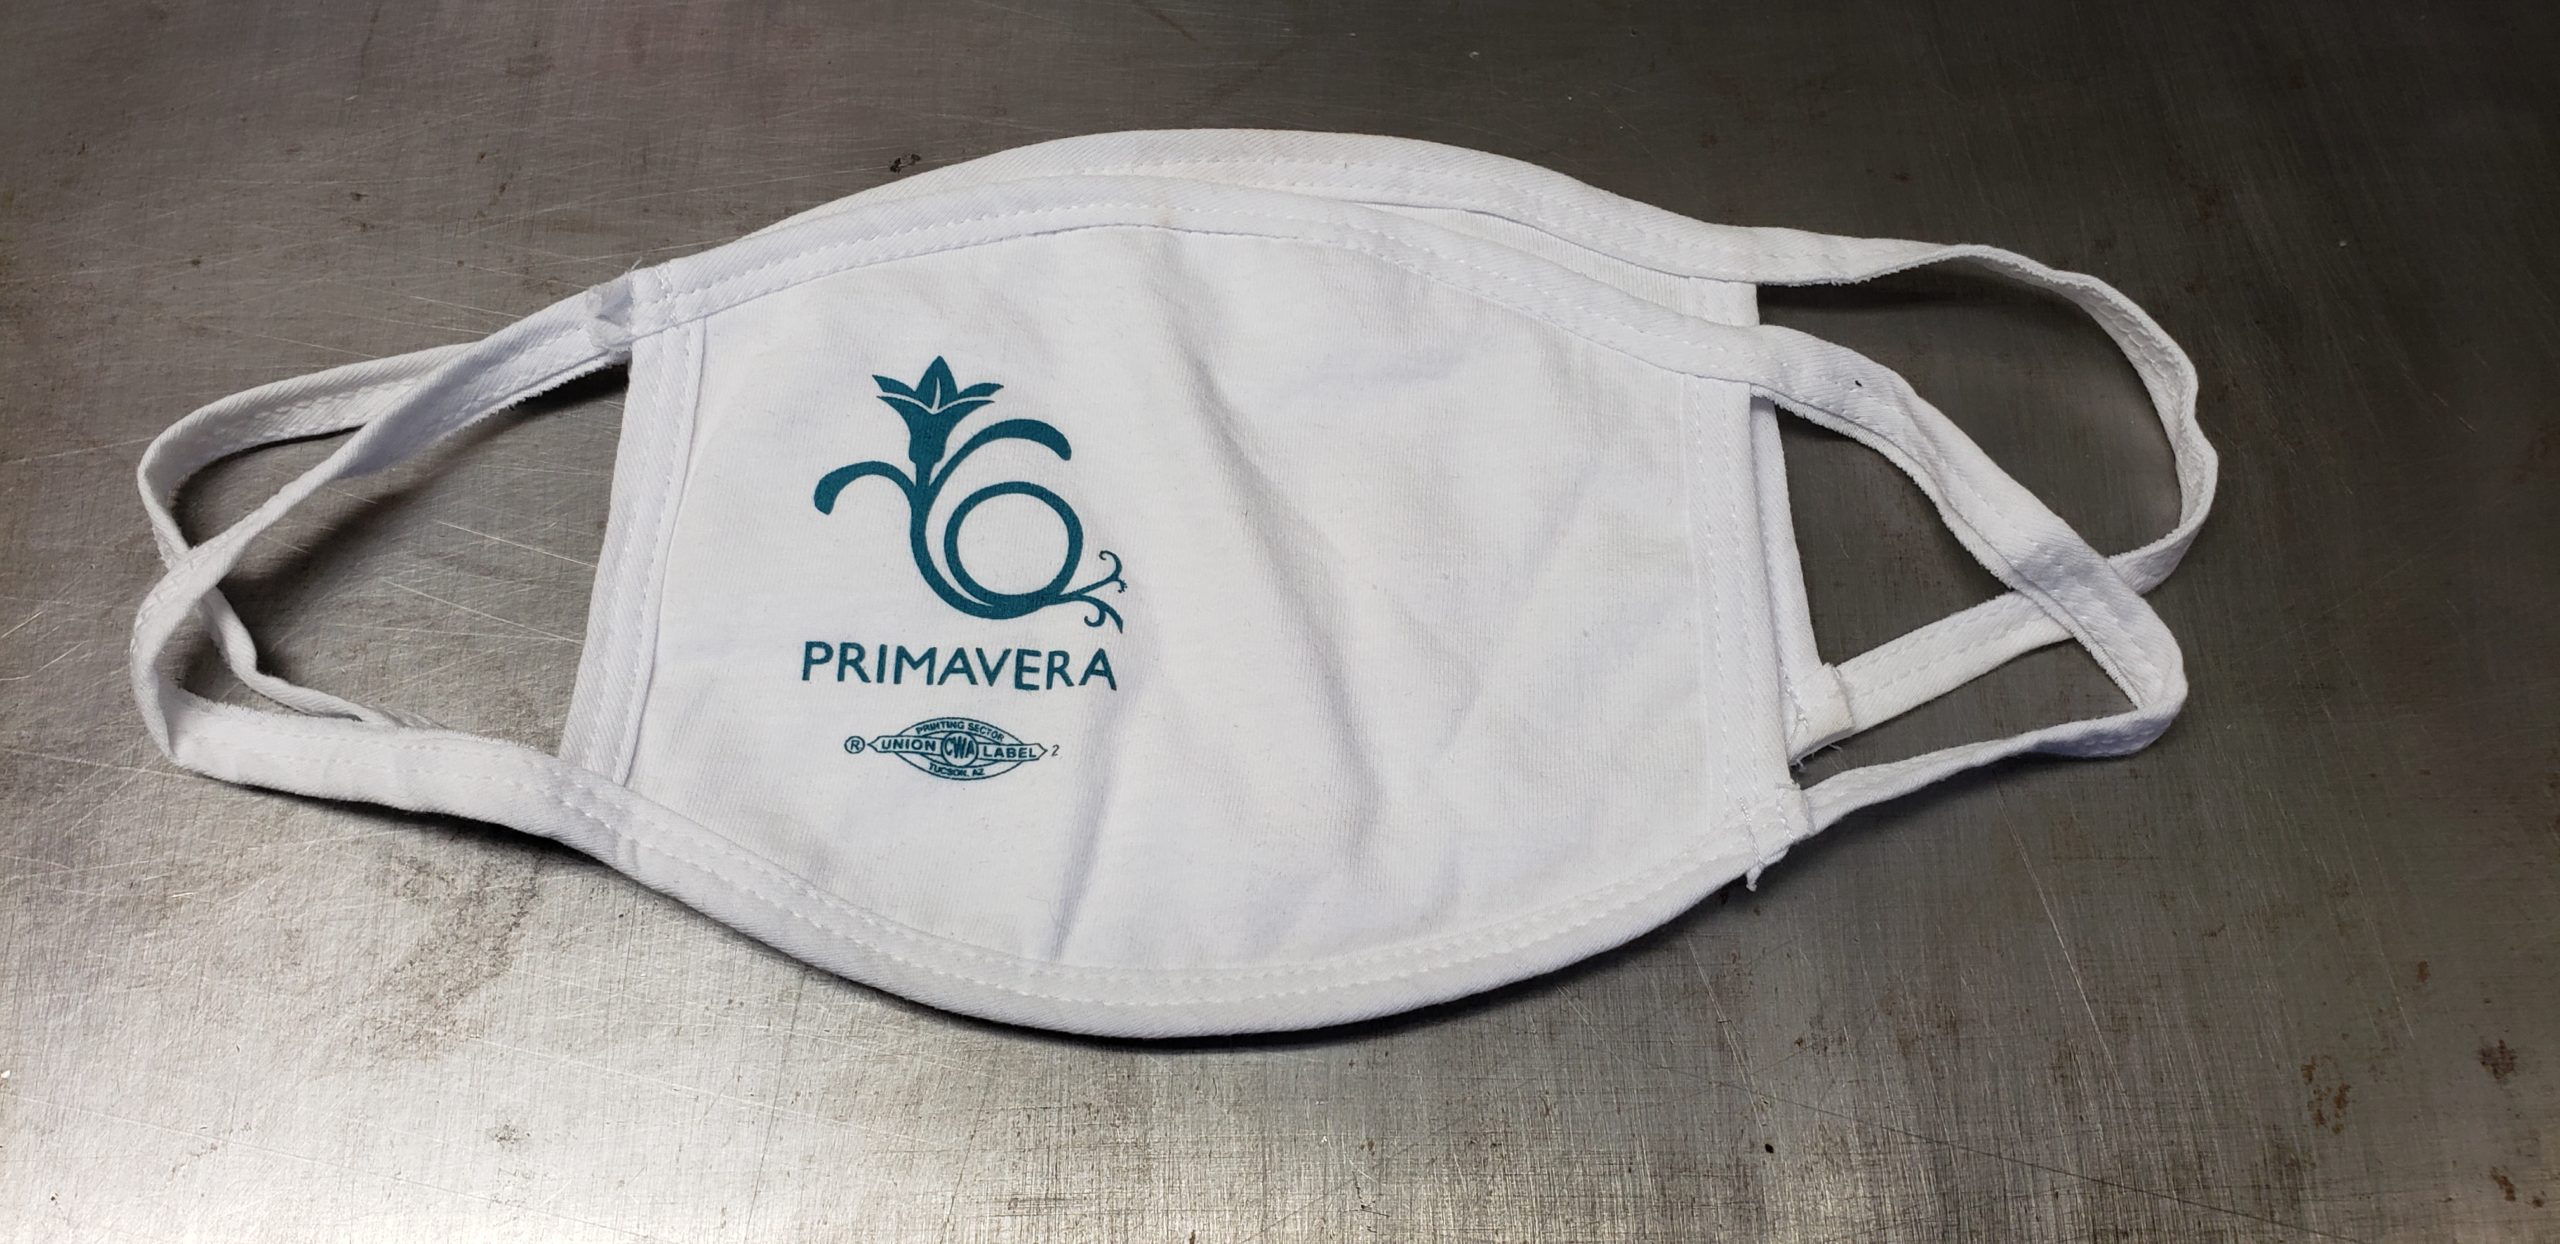 White cotton face mask with union screen printed one color logo of the Primavera.